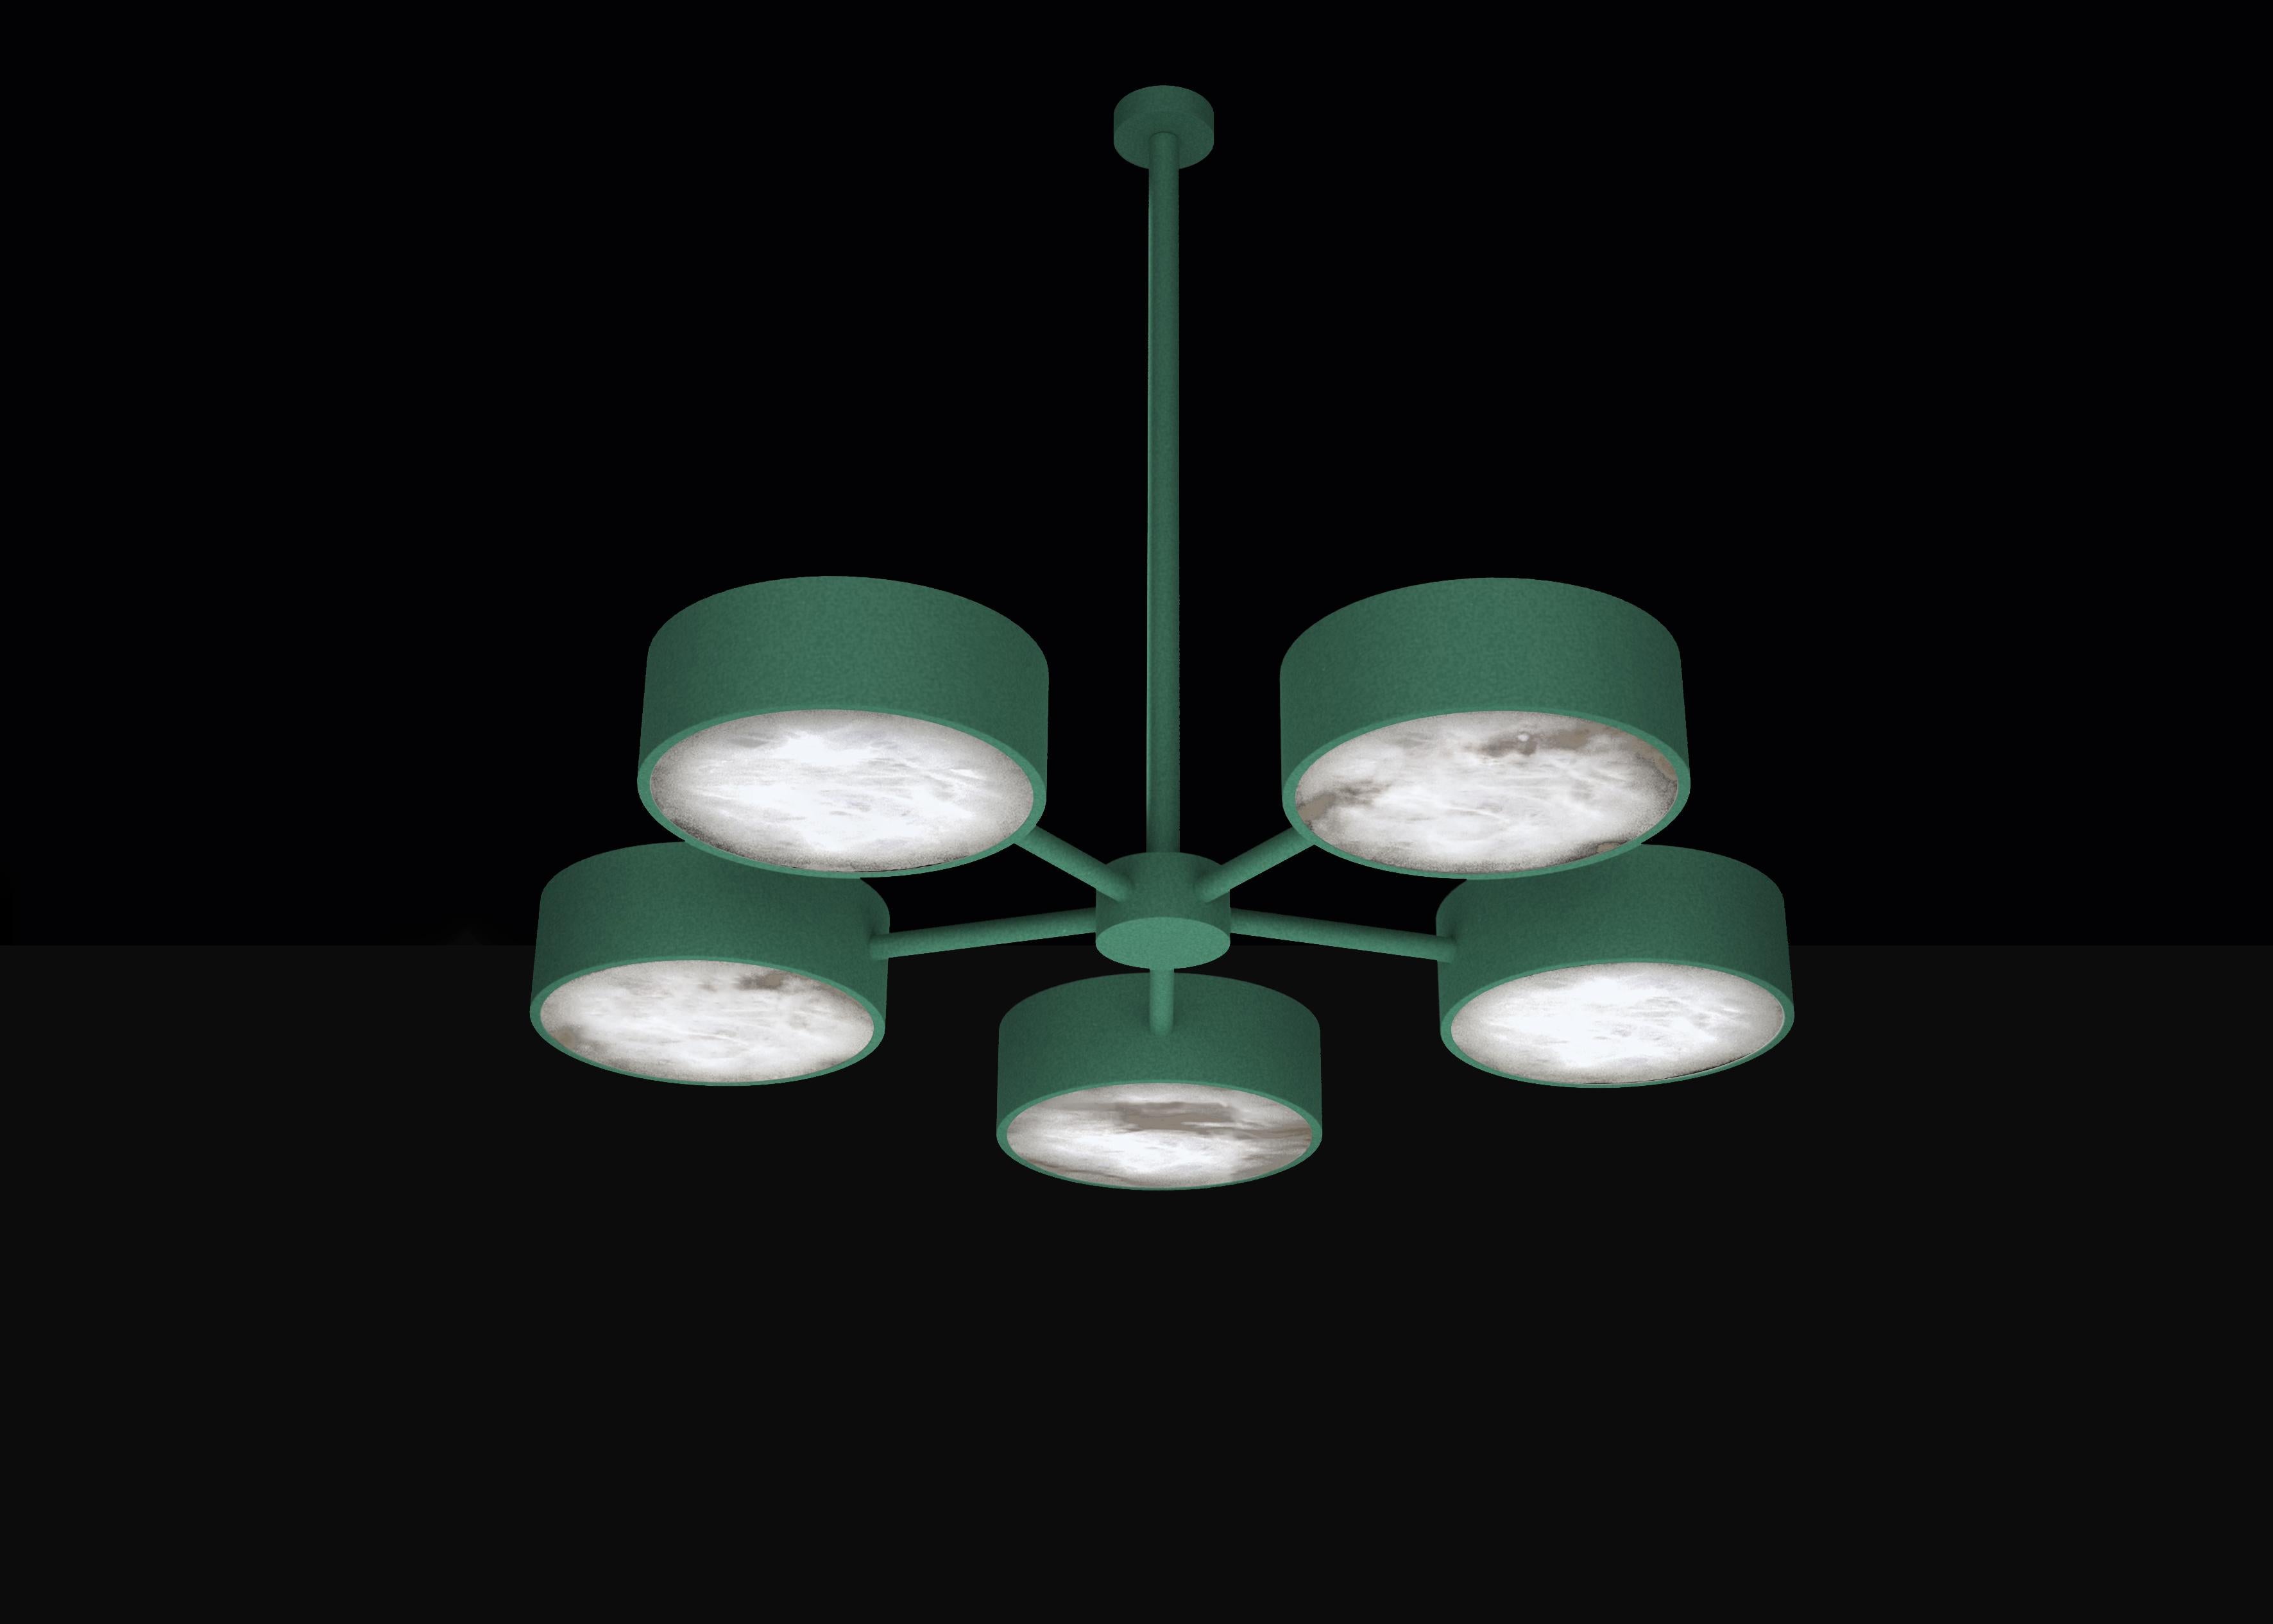 Chaos Freedom Green Metal Chandelier by Alabastro Italiano
Dimensions: D 97 x W 100 x H 84.5 cm.
Materials: White alabaster and metal.

Available in different finishes: Shiny Silver, Bronze, Brushed Brass, Ruggine of Florence, Brushed Burnished,